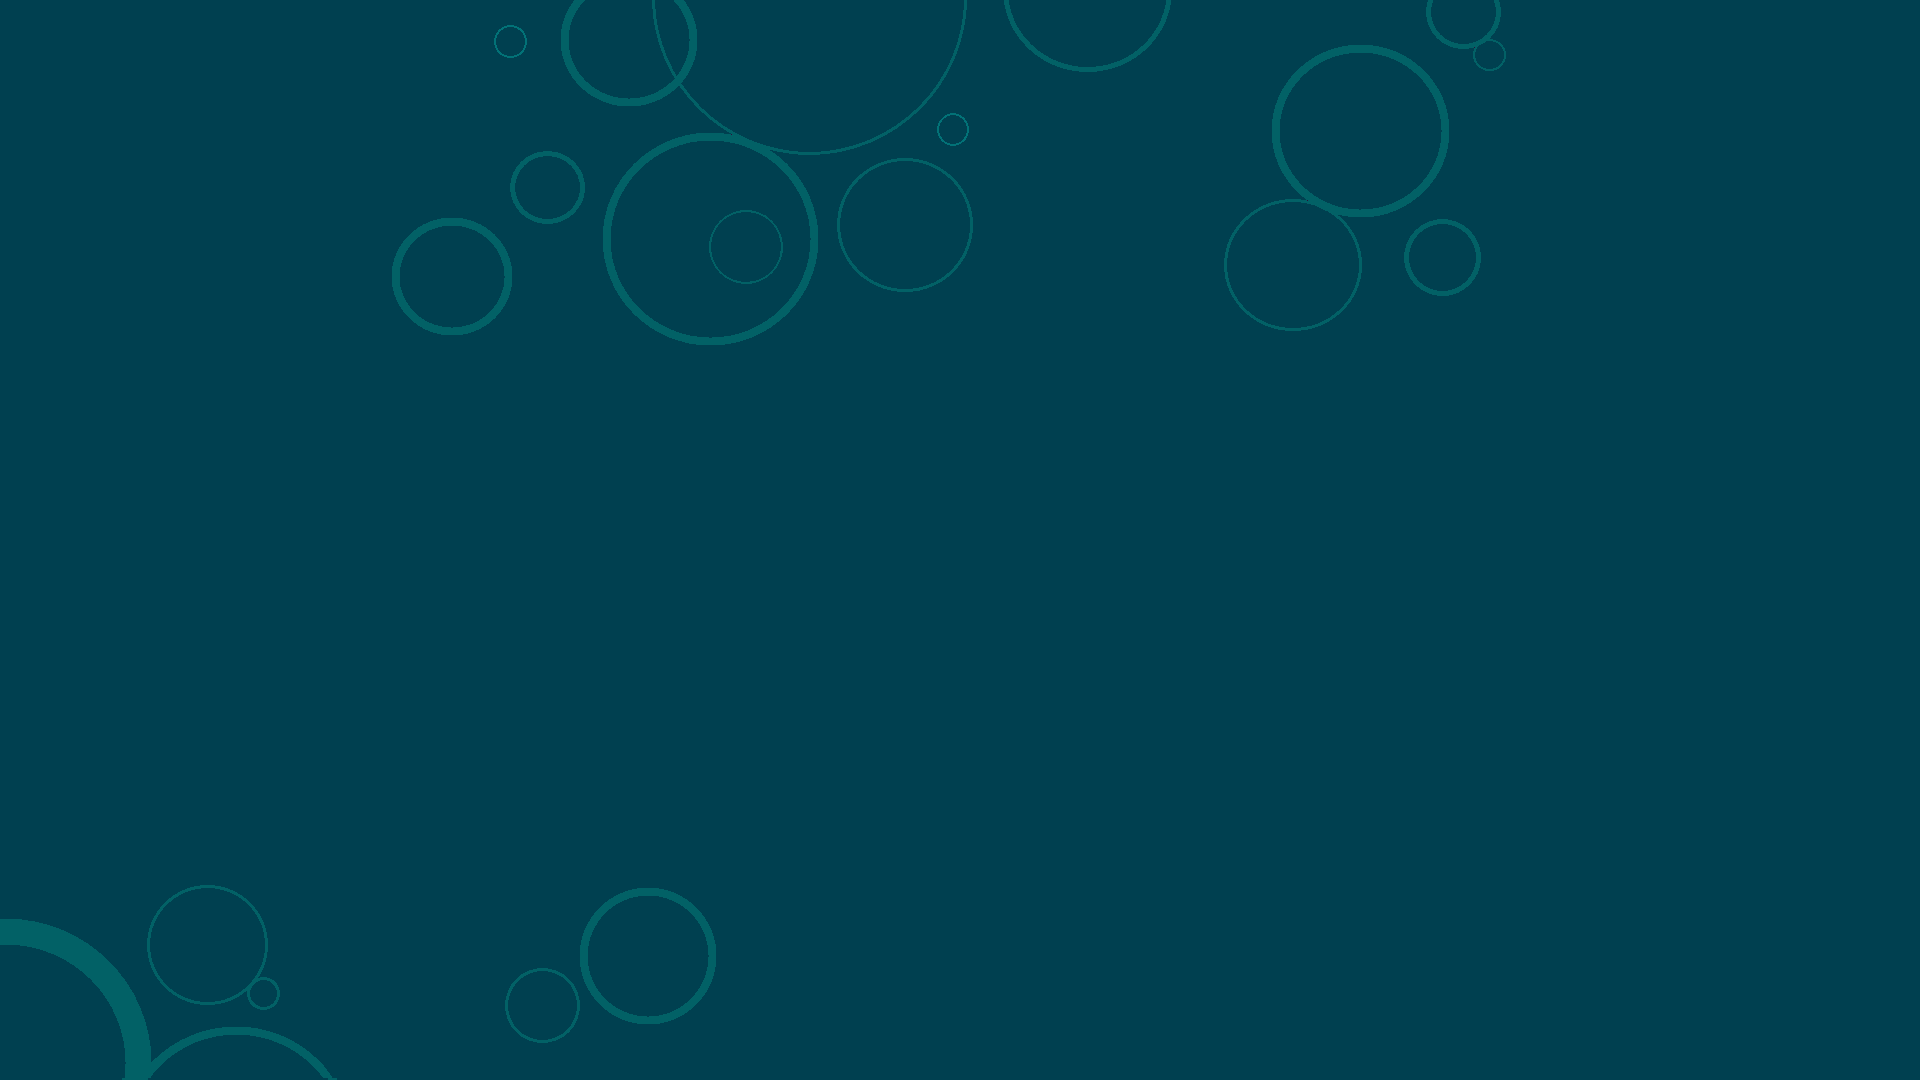 Dark Turquoise Windows Bubbles Background By